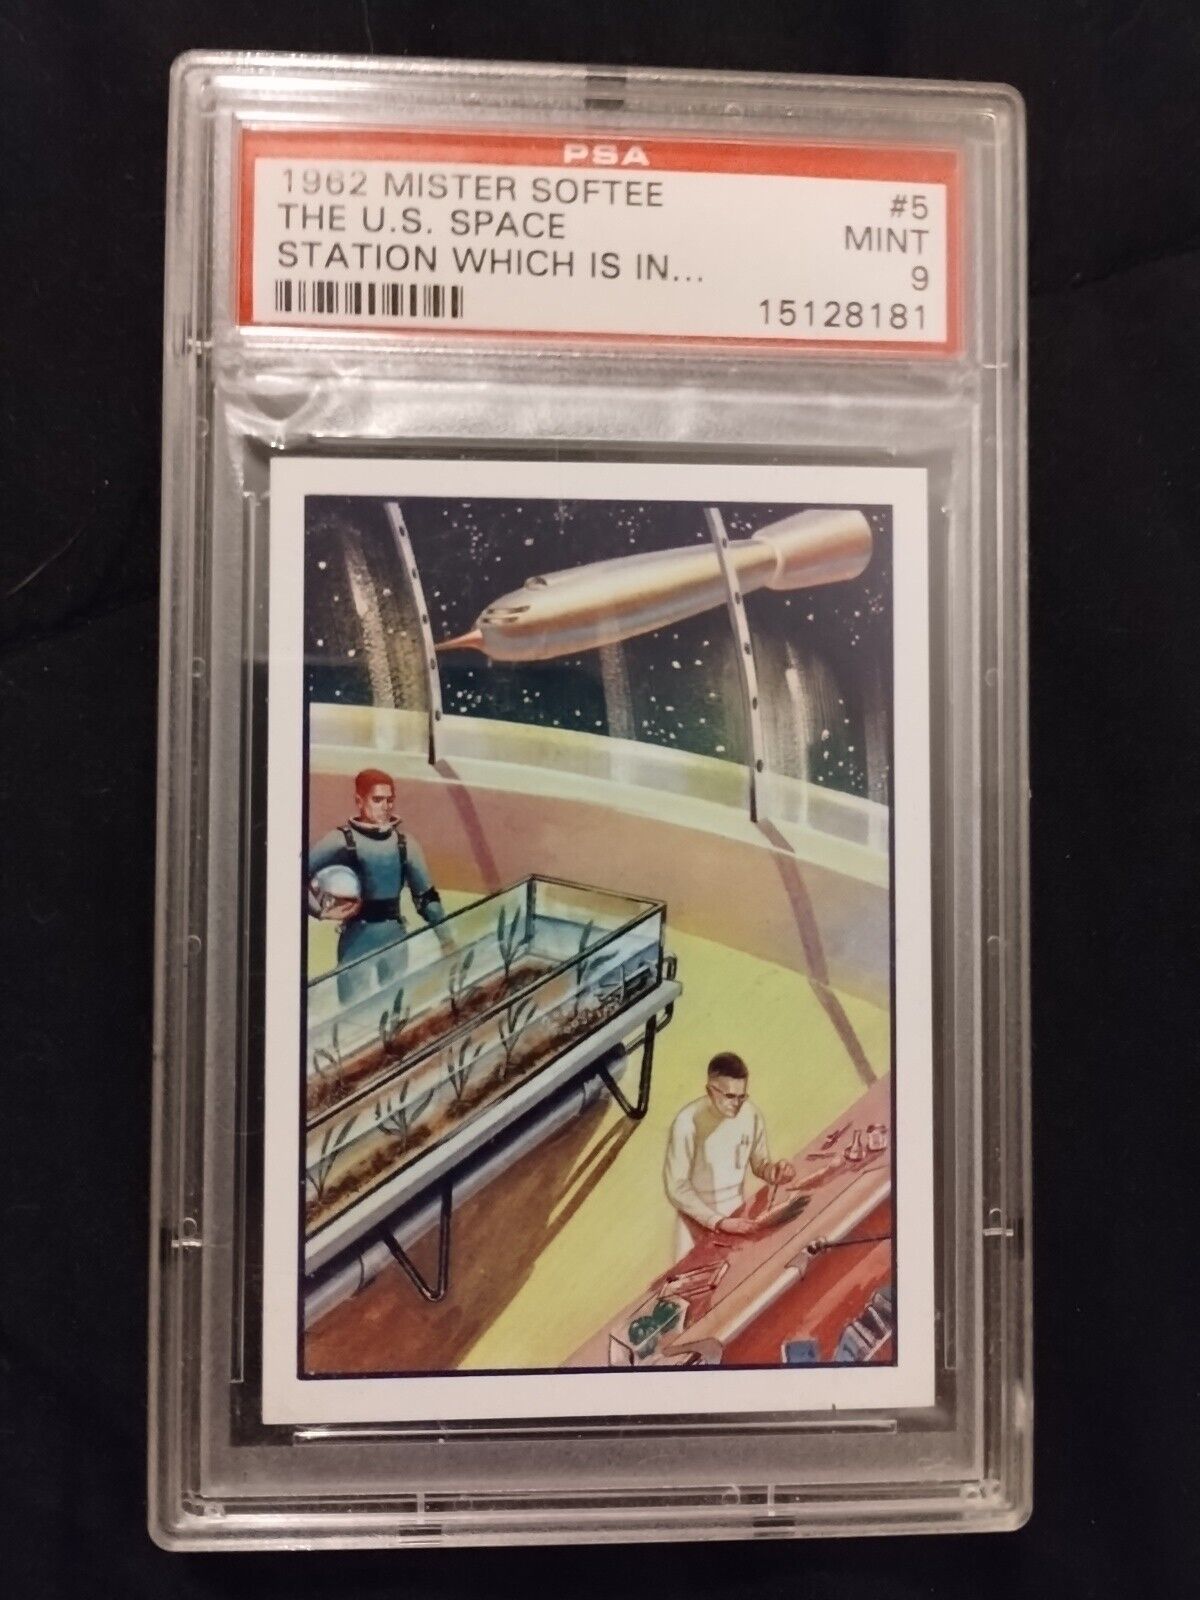 1962 Mister Softee Adventures of Captain Chapel #05 The U.S.Space Station..PSA 9